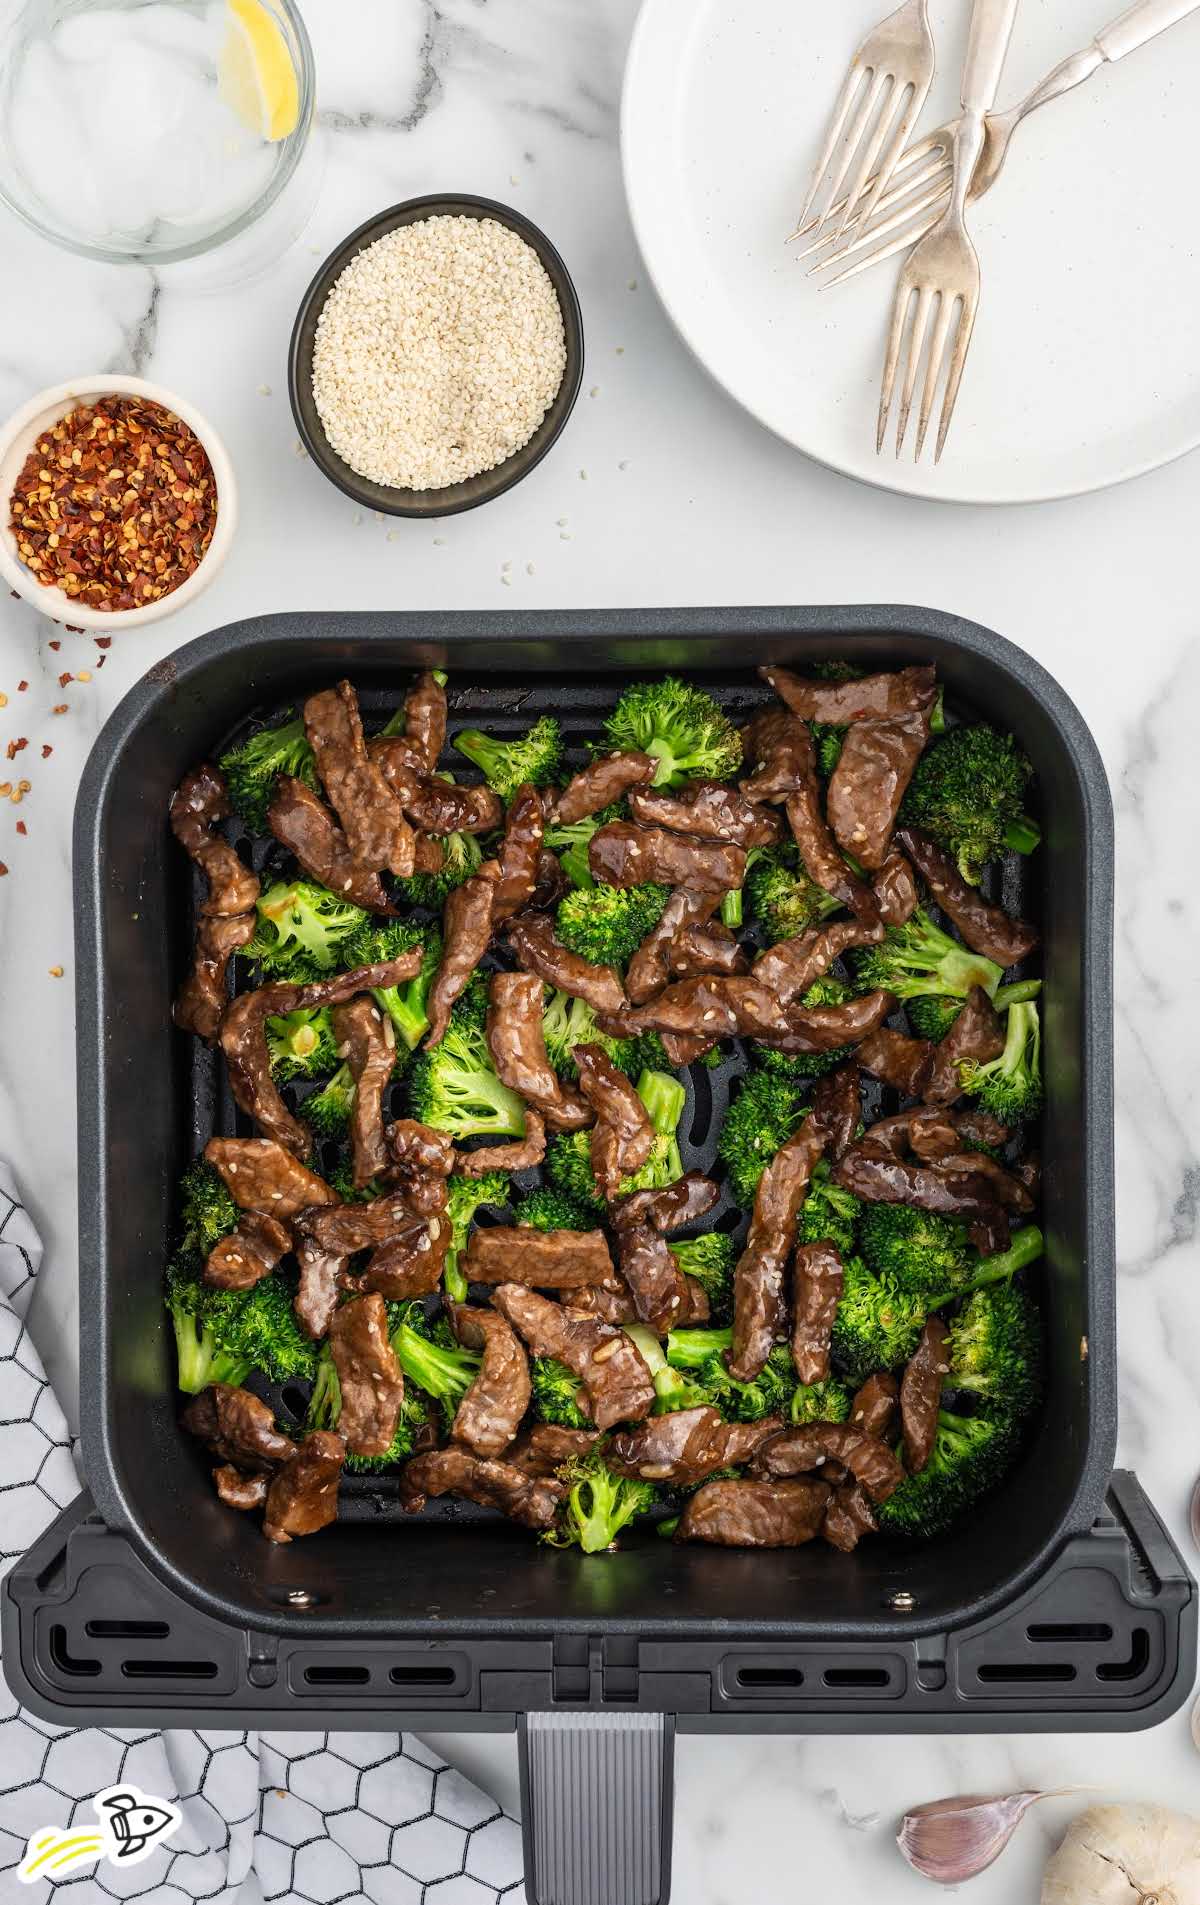 Beef and Broccoli in an air fryer